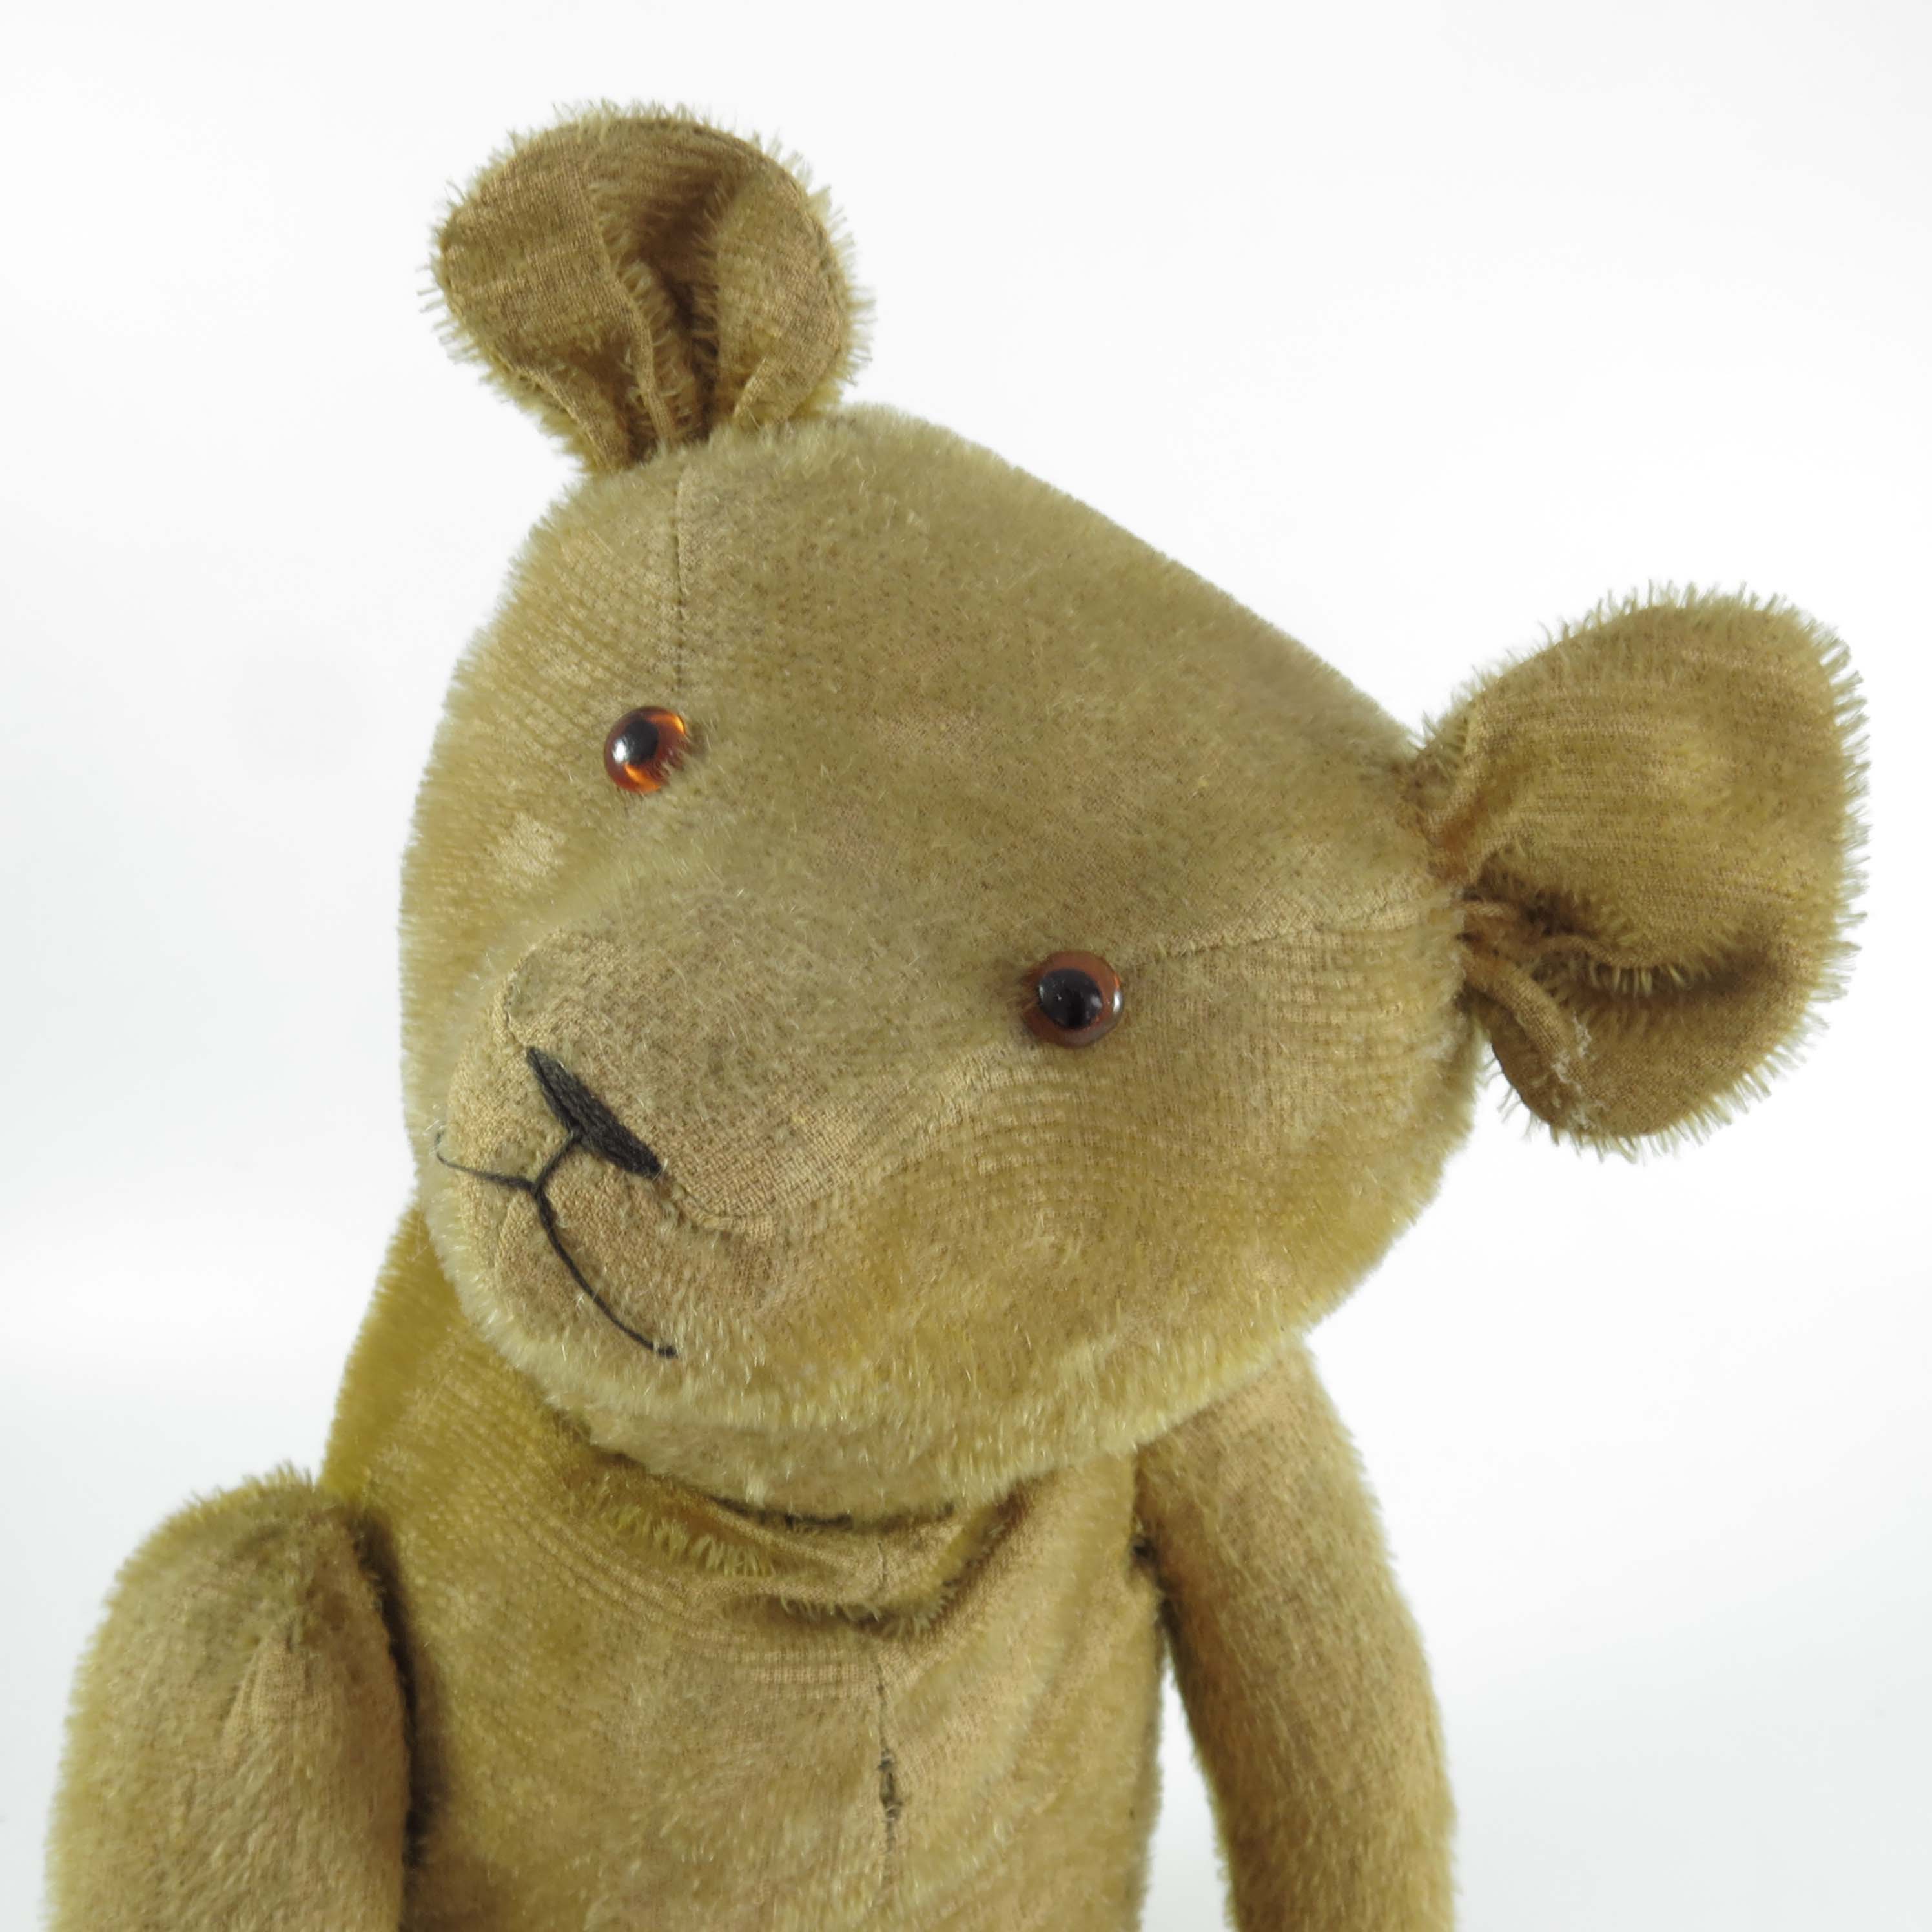 A VINTAGE 'BLONDE' JOINTED TEDDY BEAR WITH GROWLER (NOT WORKING) APPROX. 59 cm - Image 2 of 3